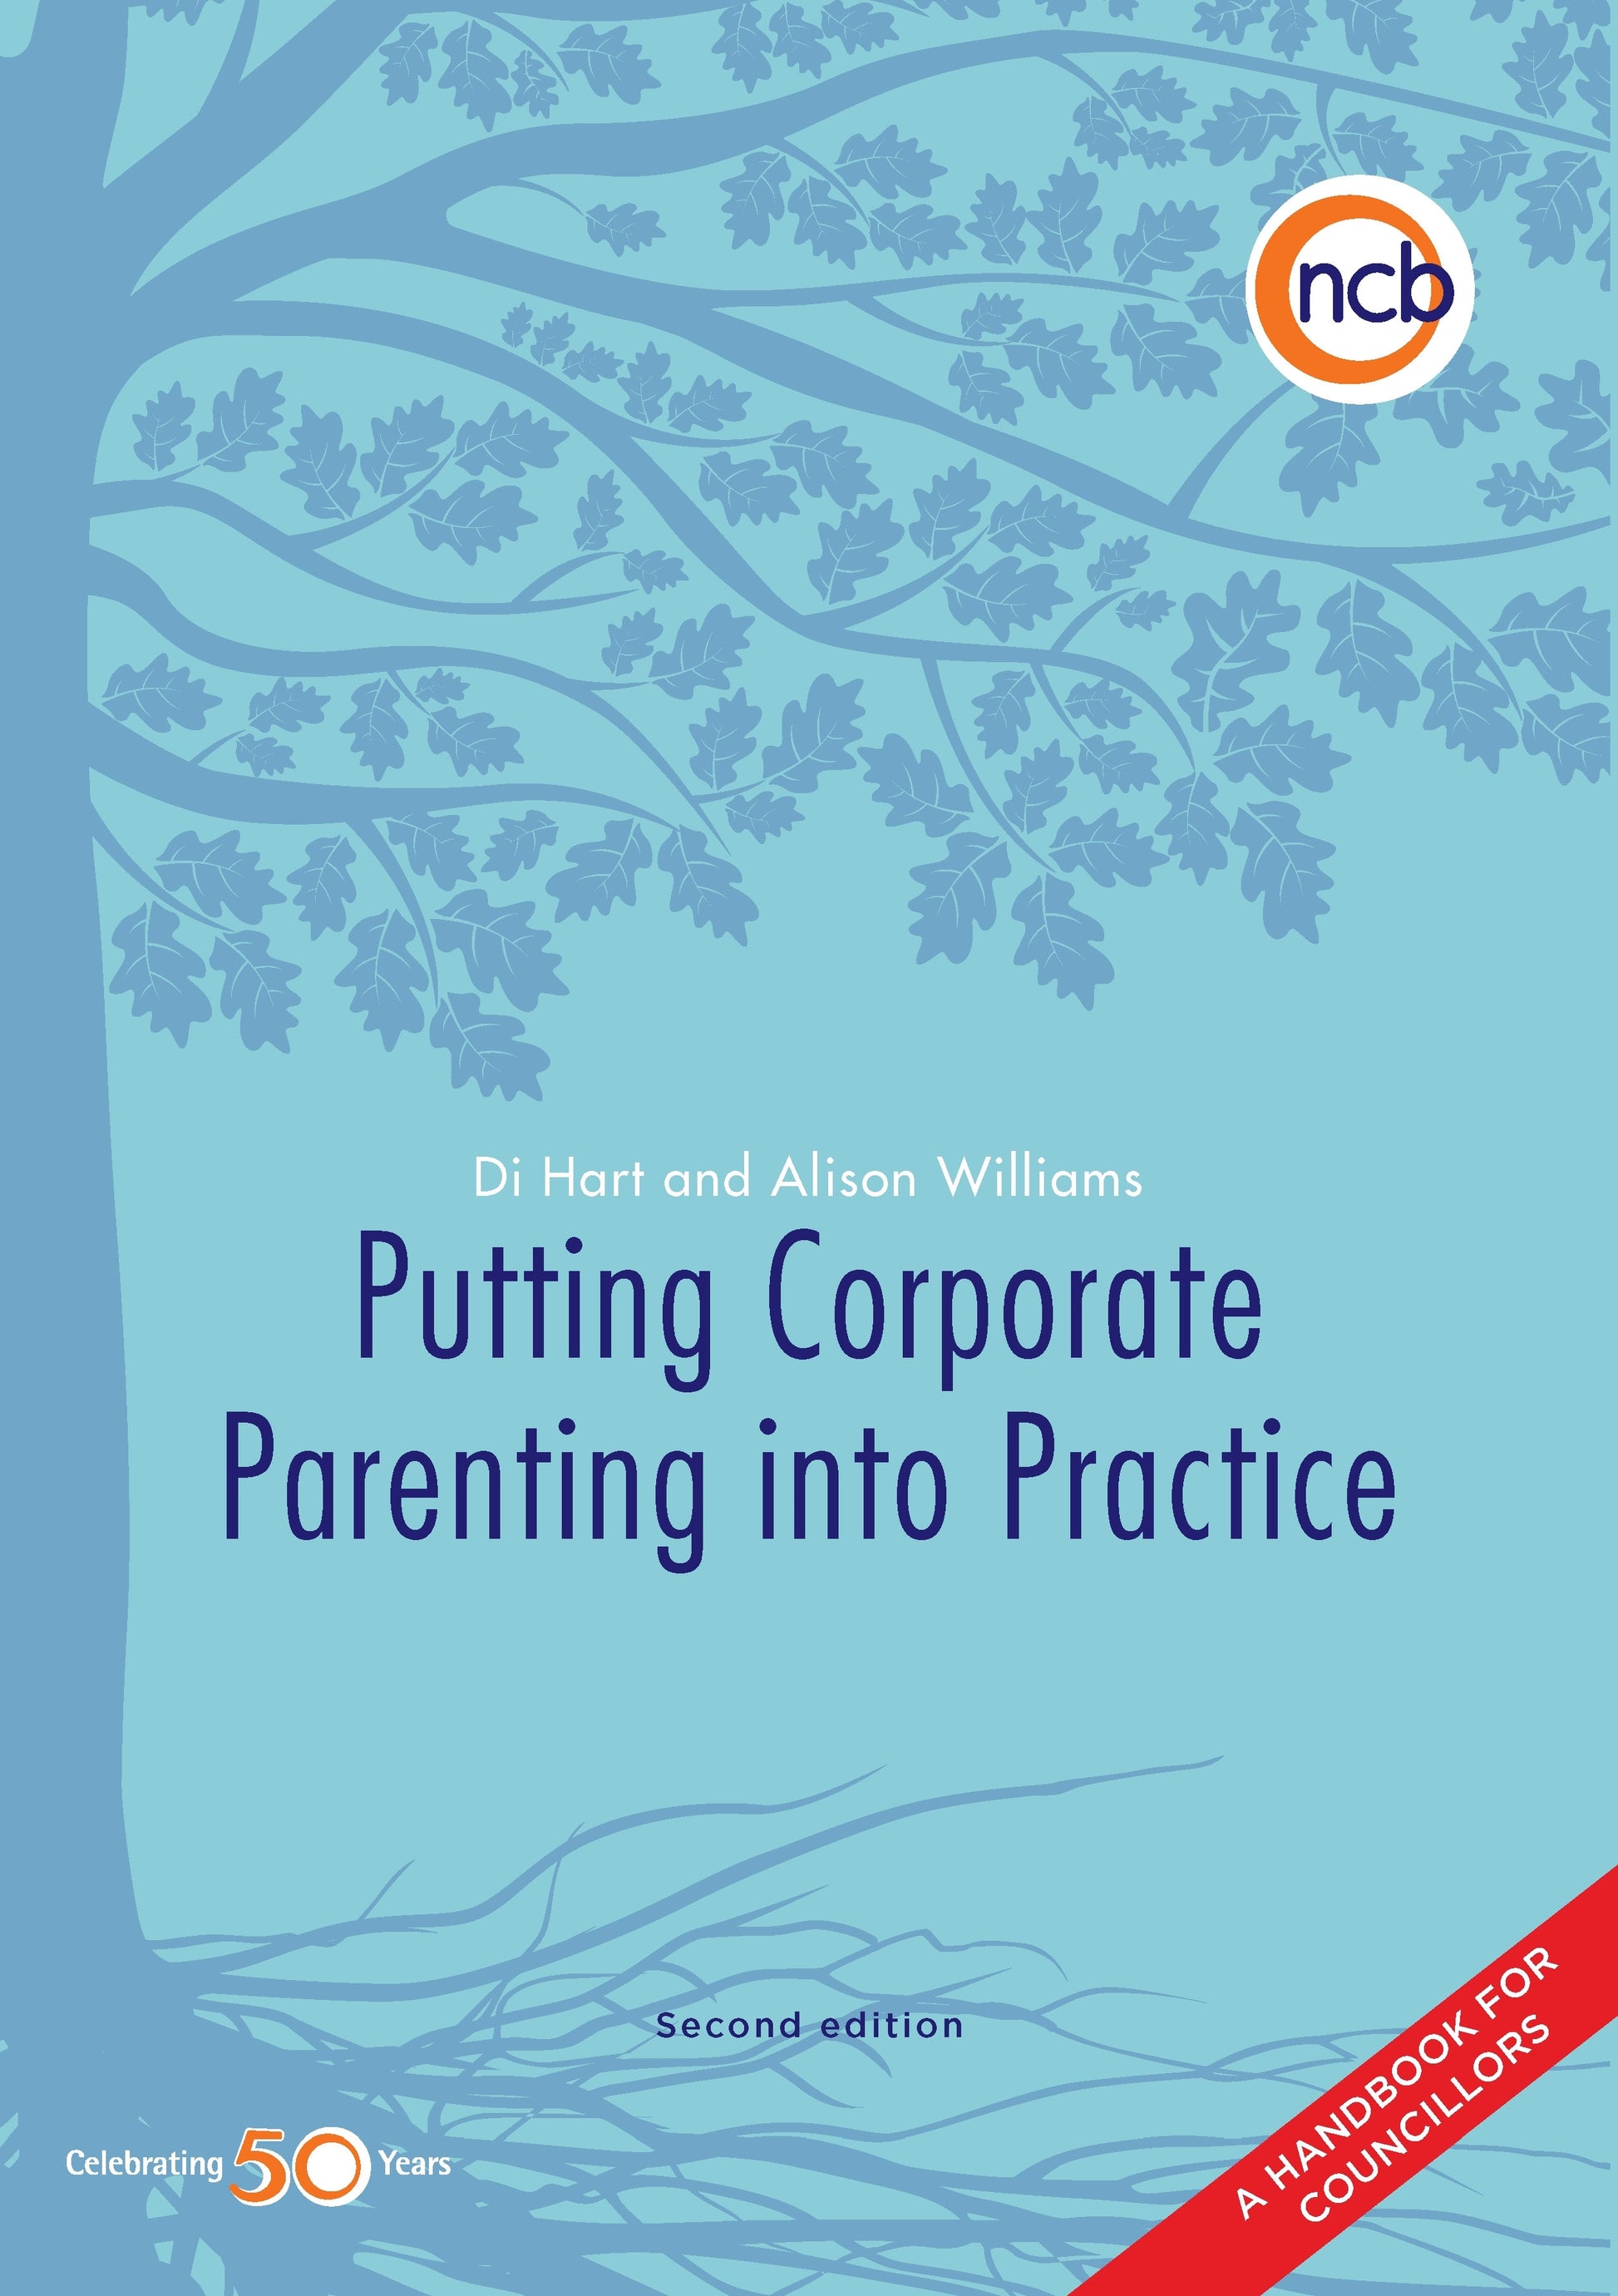 Putting Corporate Parenting into Practice, Second Edition by Di Hart, Alison Williams